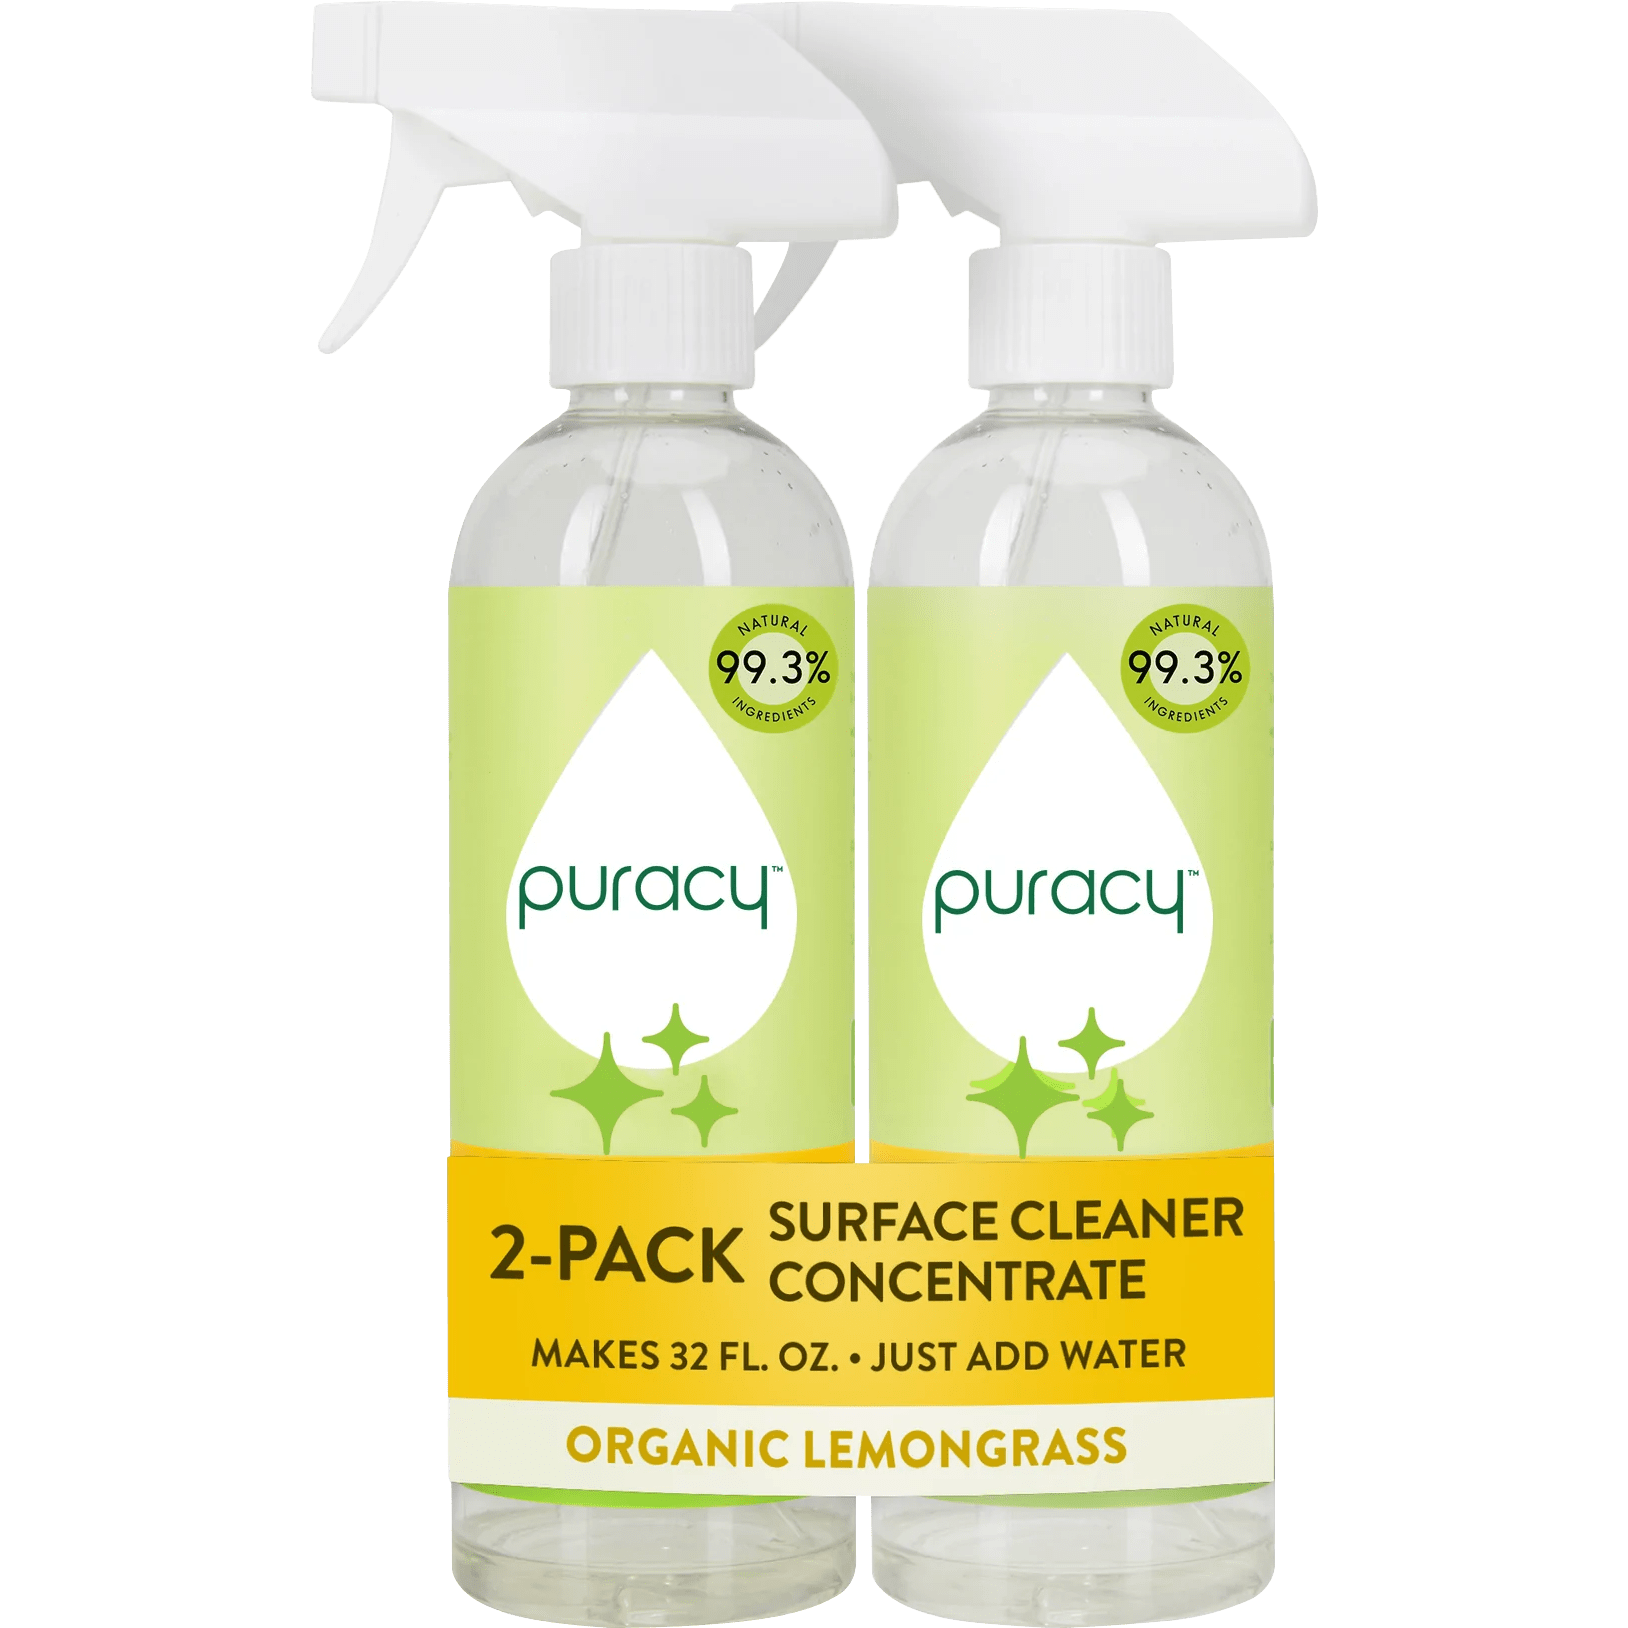 Surface Cleaner Packettes